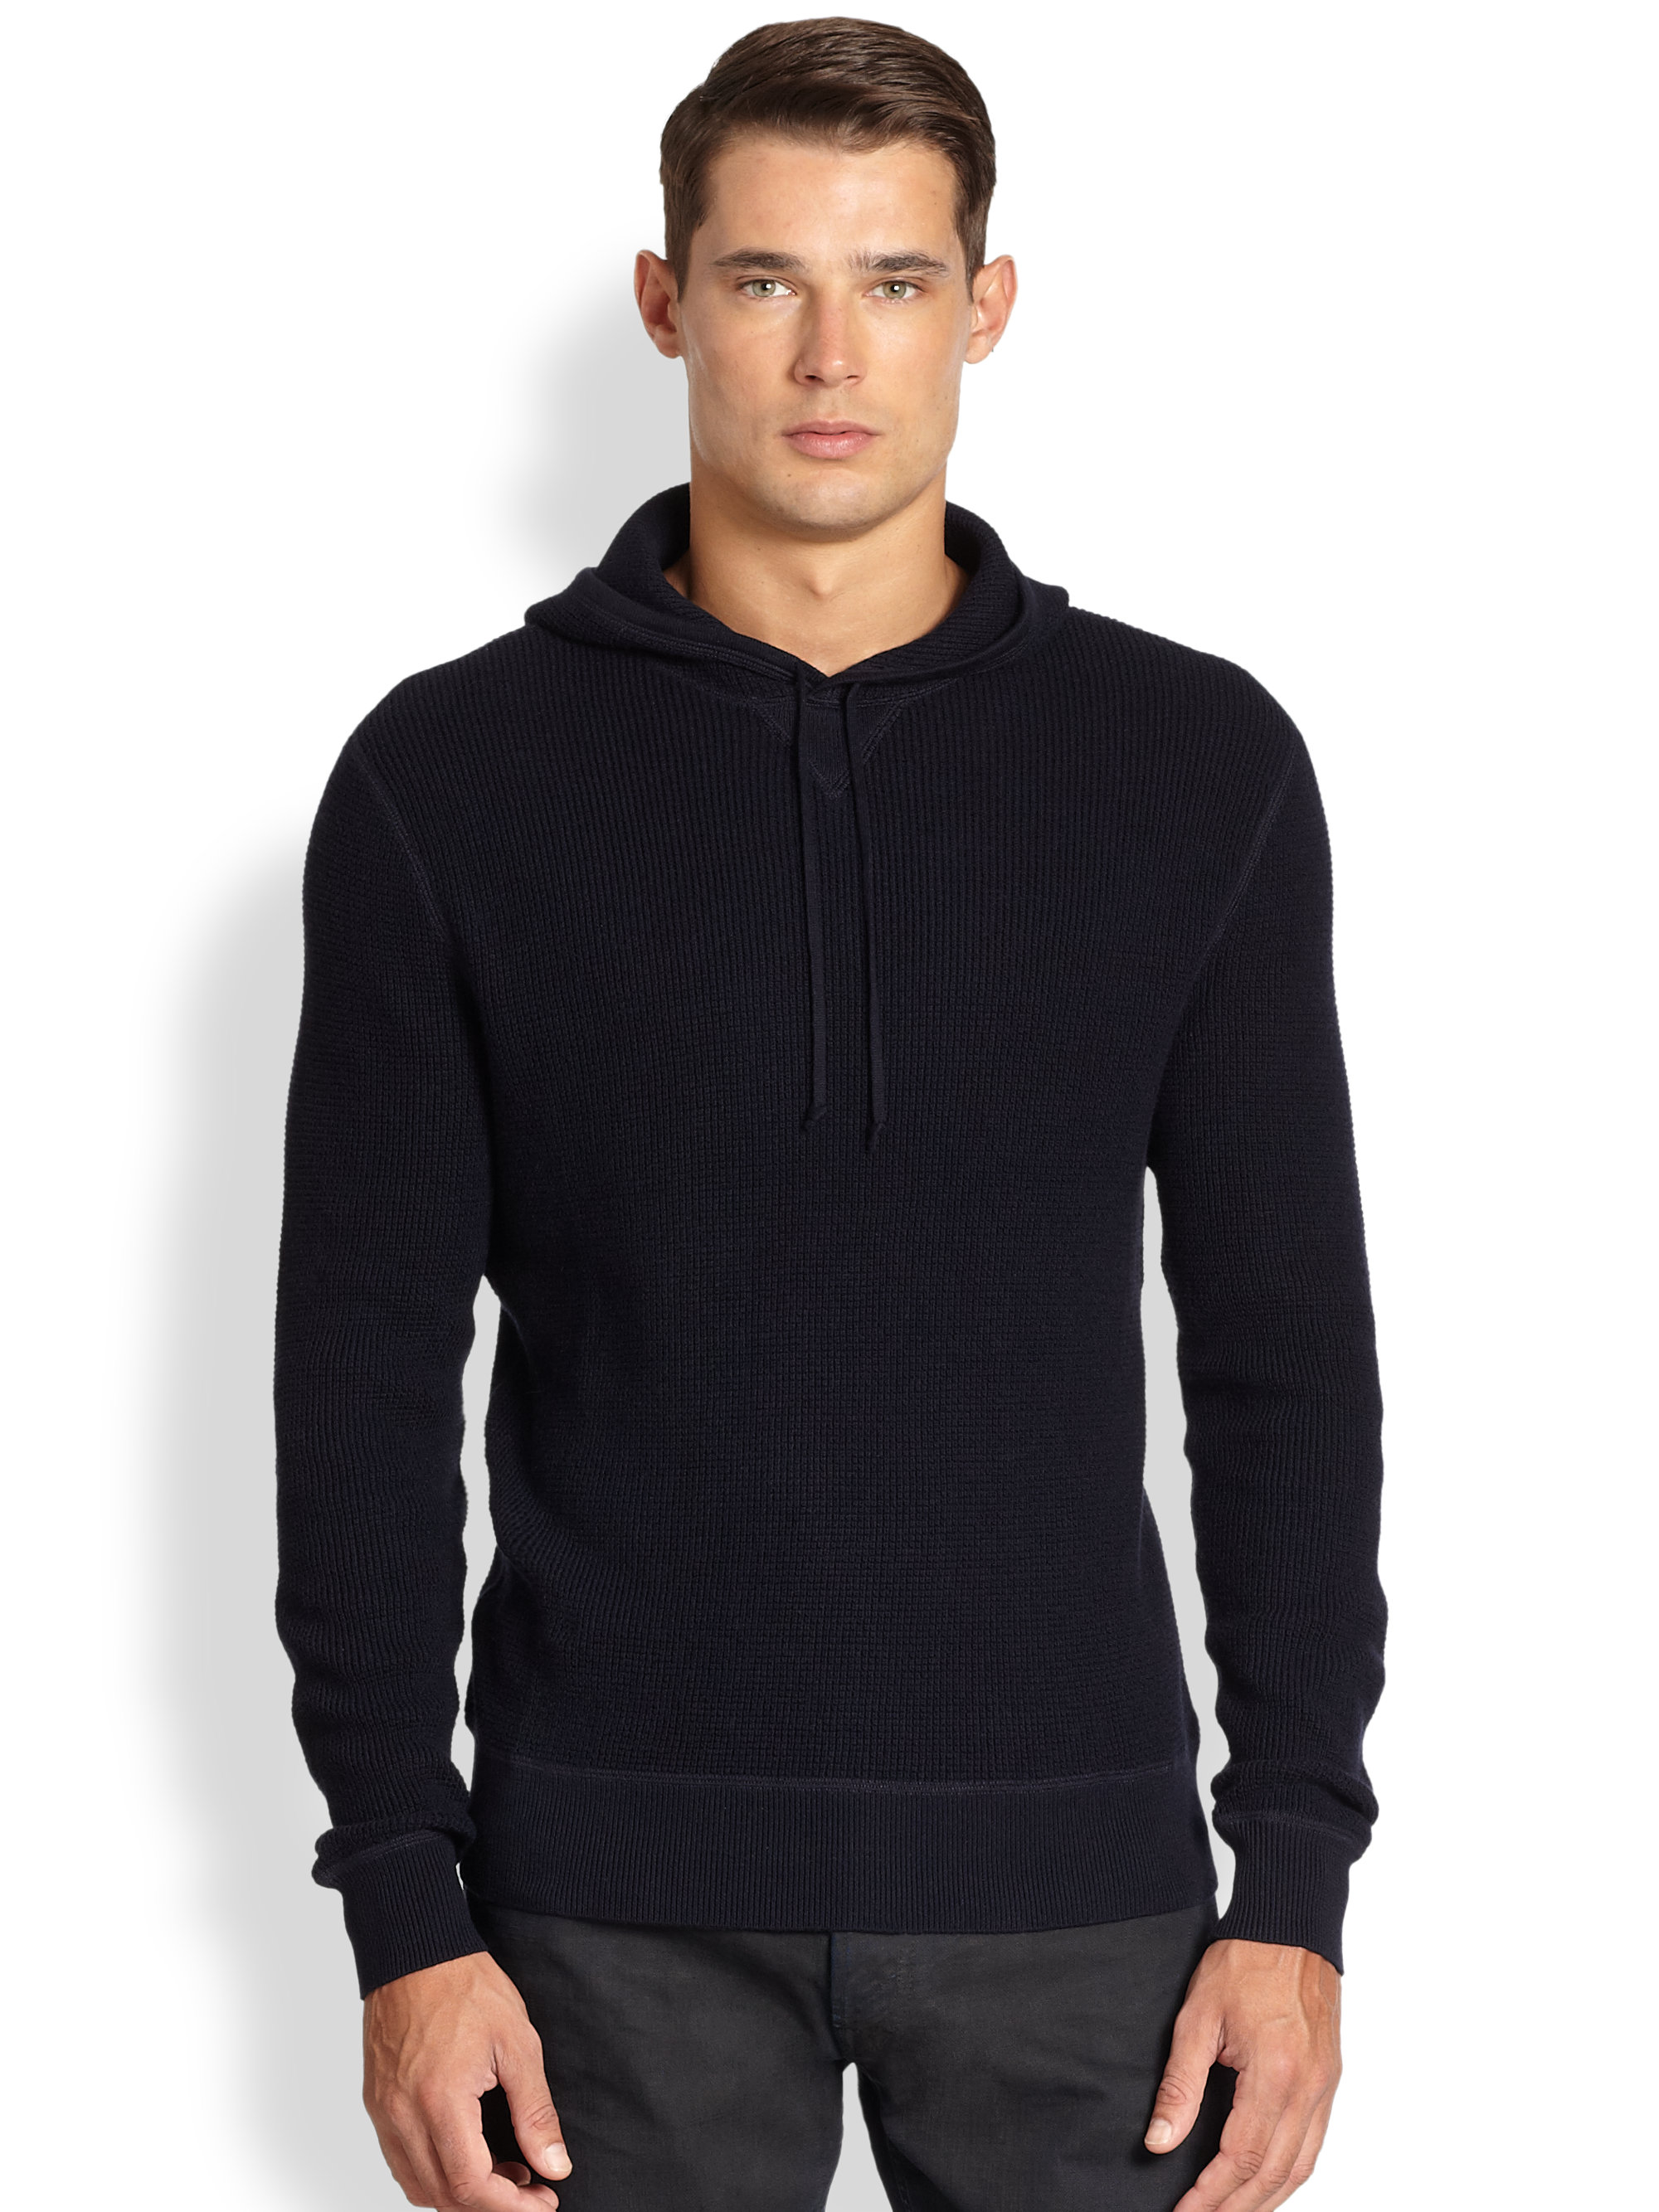 Ralph Lauren Black Label Cotton and Cashmere Thermal Hoodie in Black ...